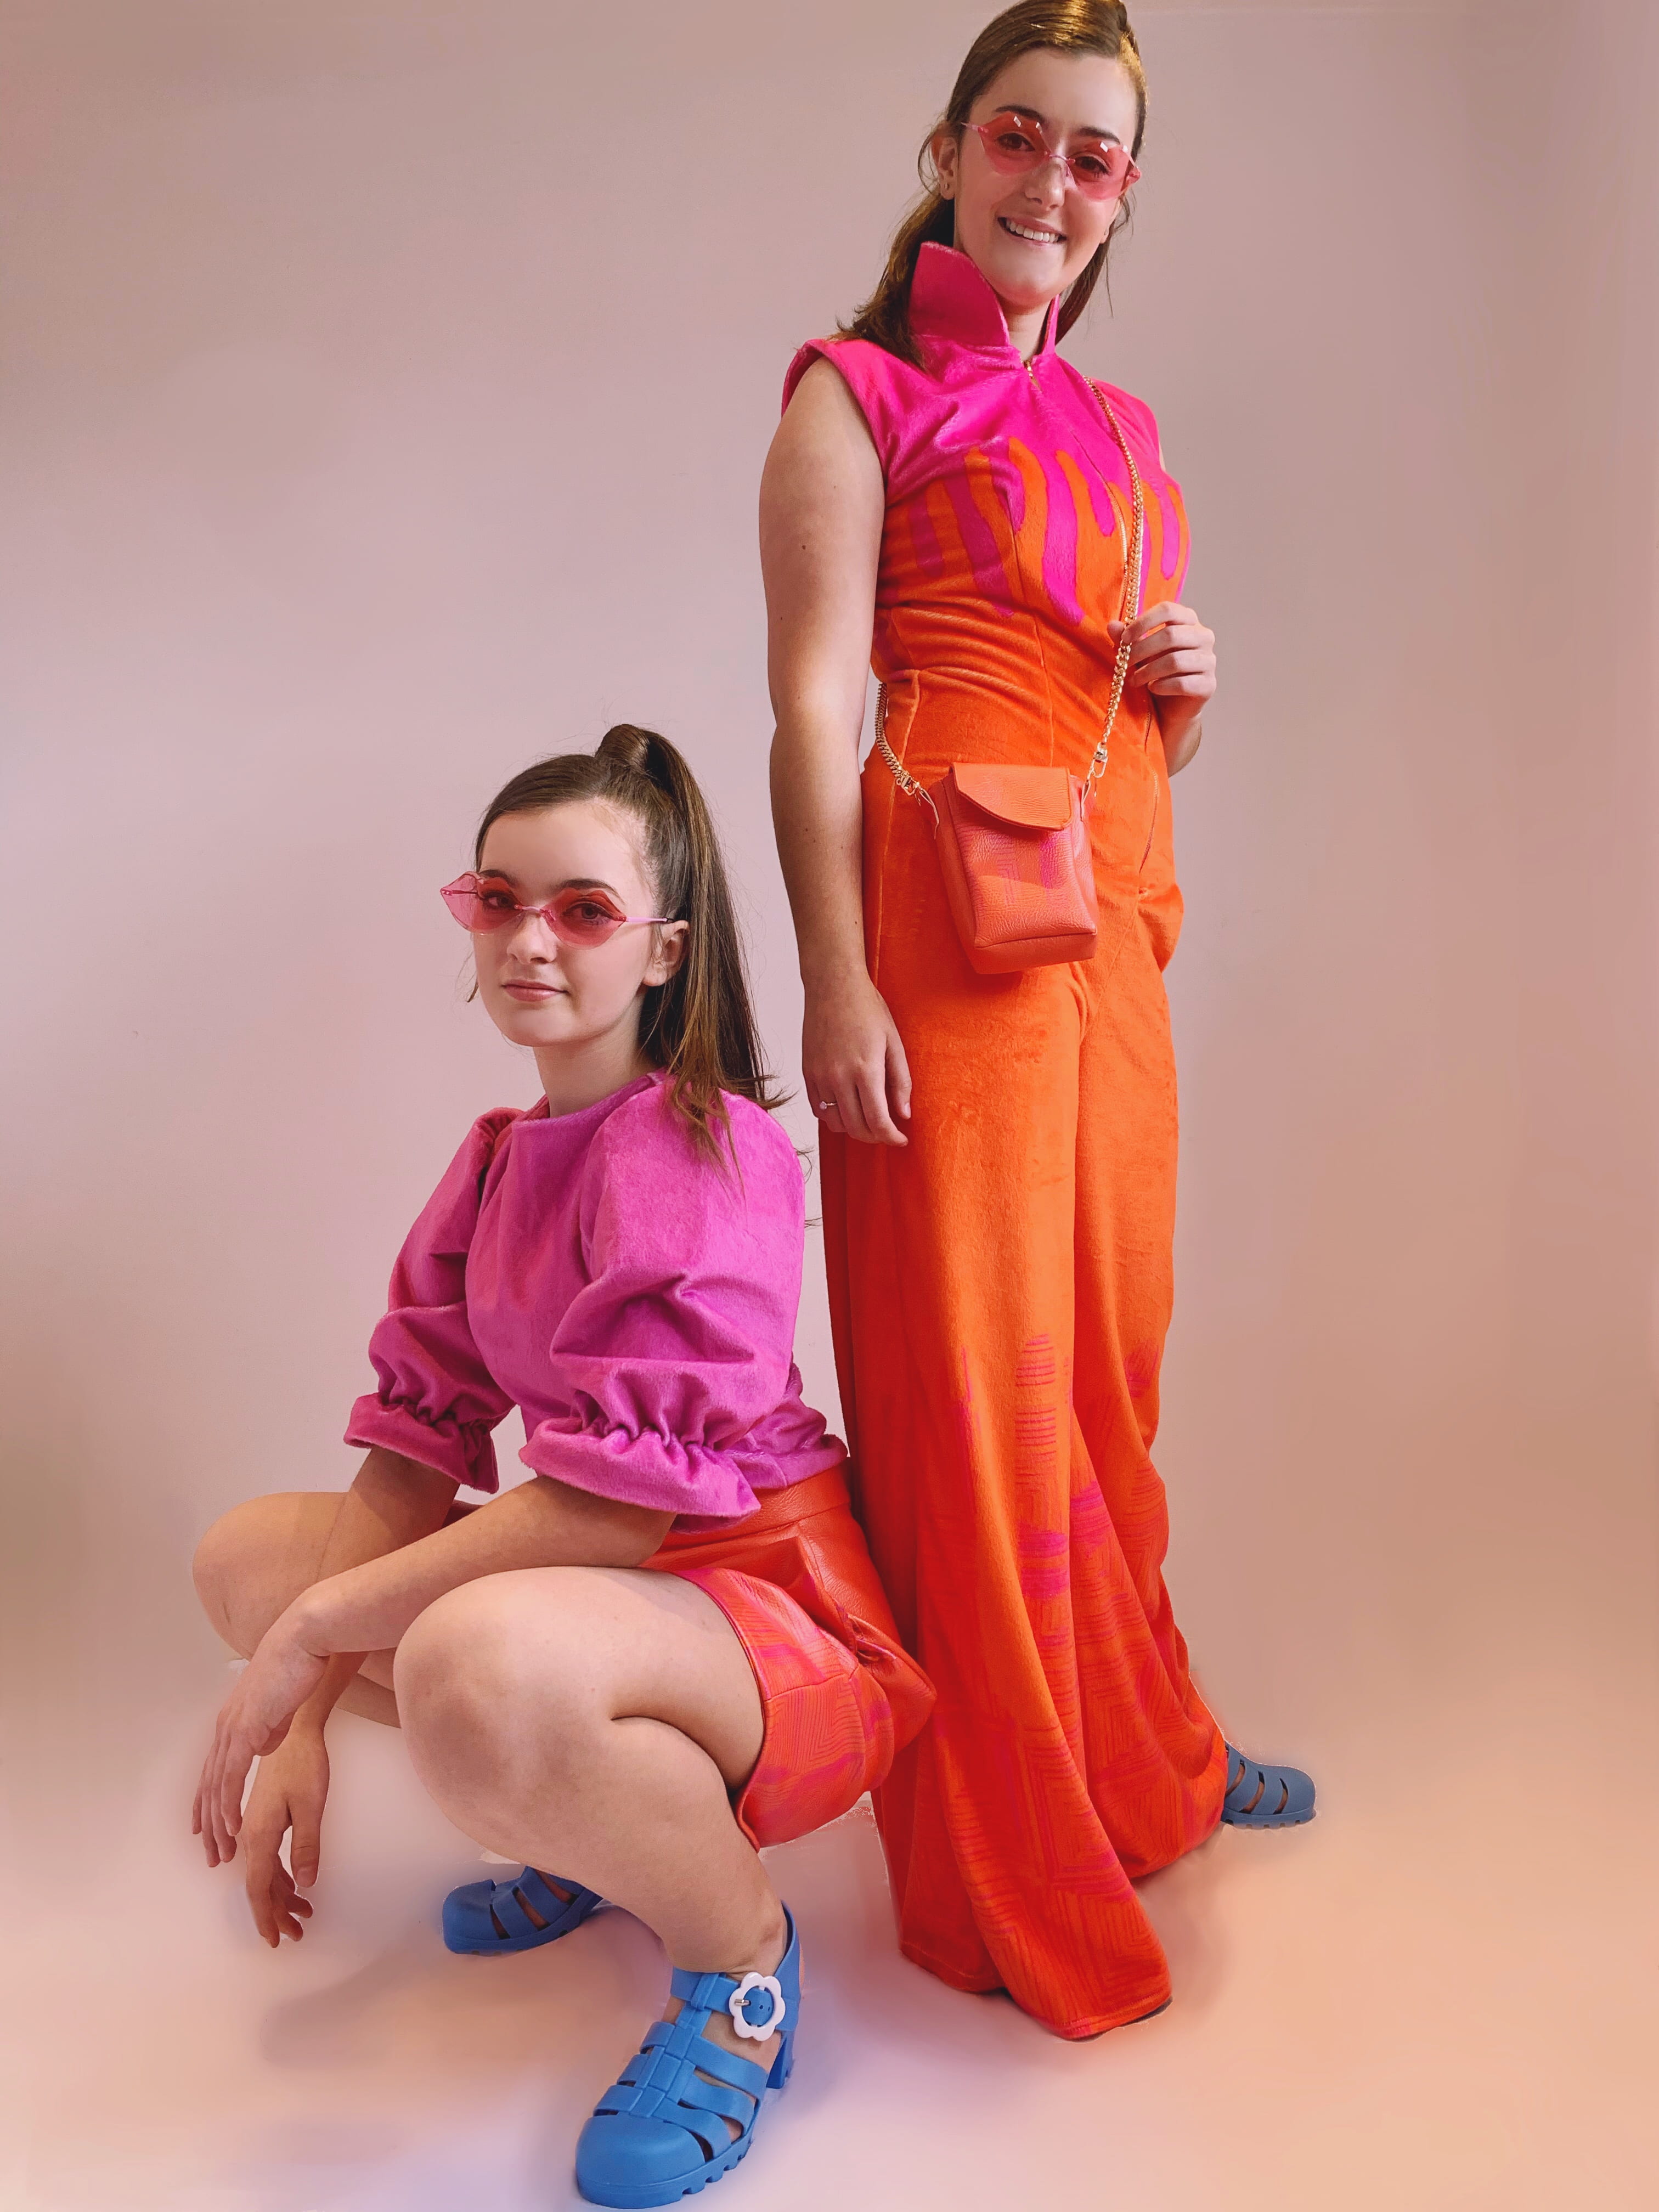 Photograph of two girls (one standing, one crouching) modelling an item in the 'Let's Get Trippy' collection.